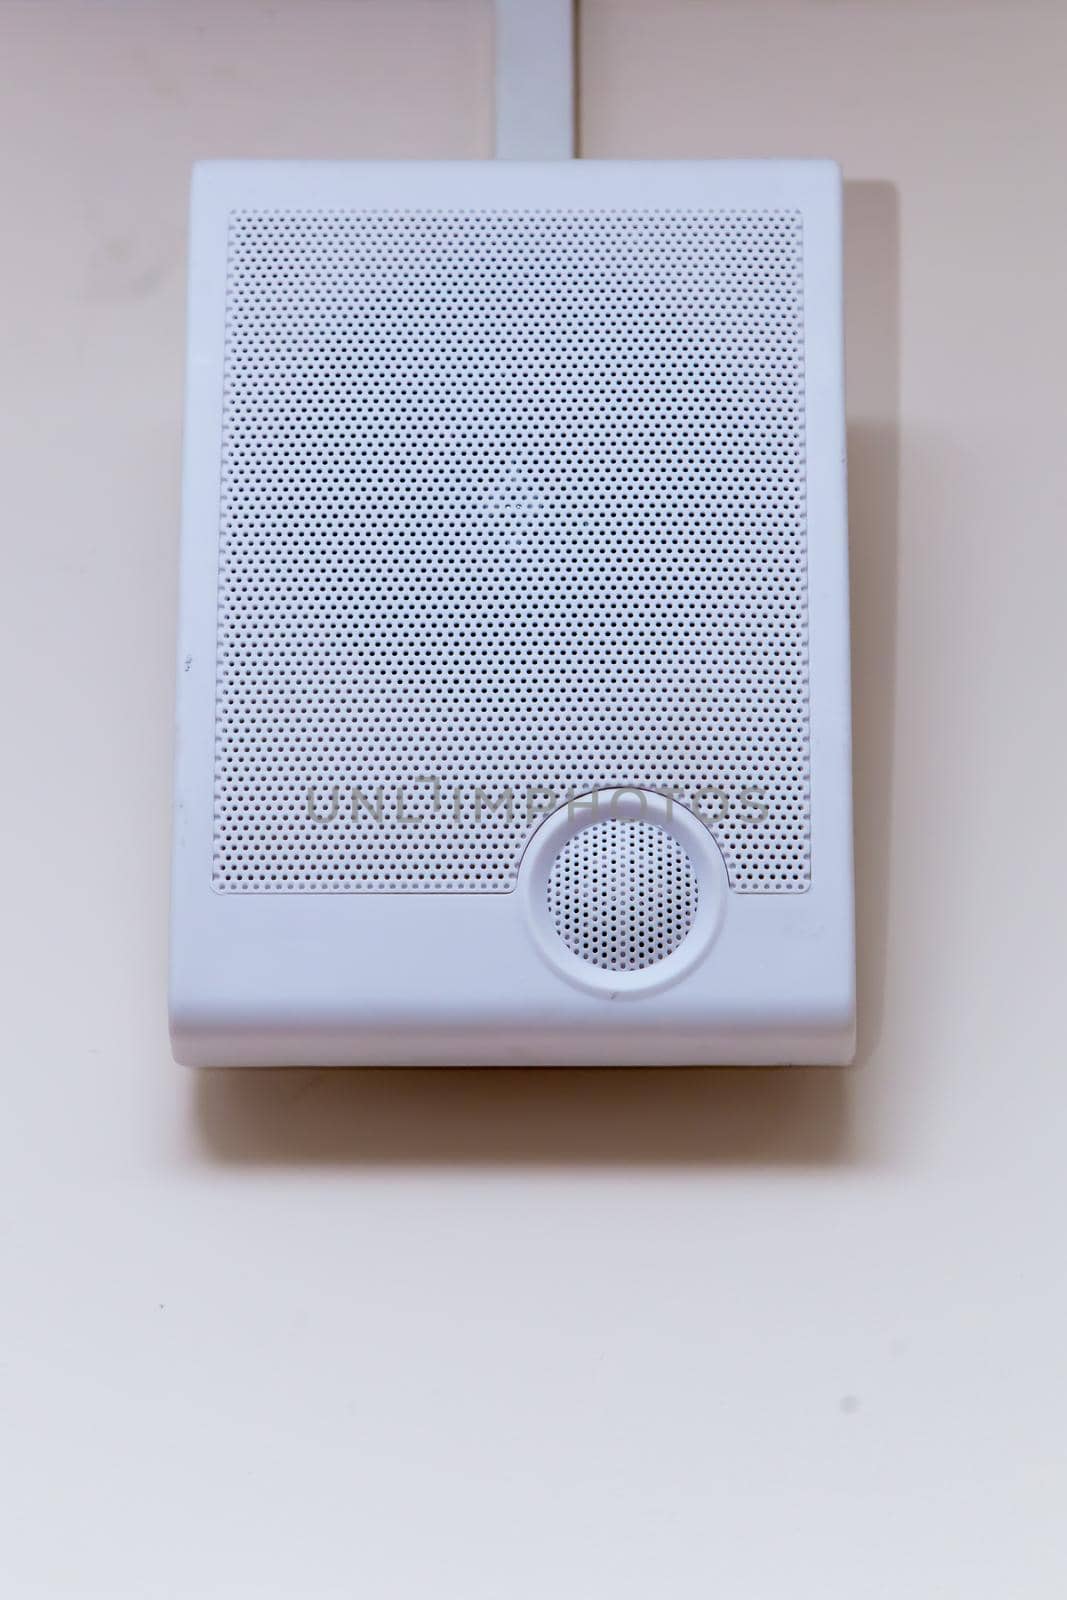 A white radio transmitter hangs on a beige wall. On the front side there is a grill with small holes for a loudspeaker. Electronic device for listening to messages, music and news.